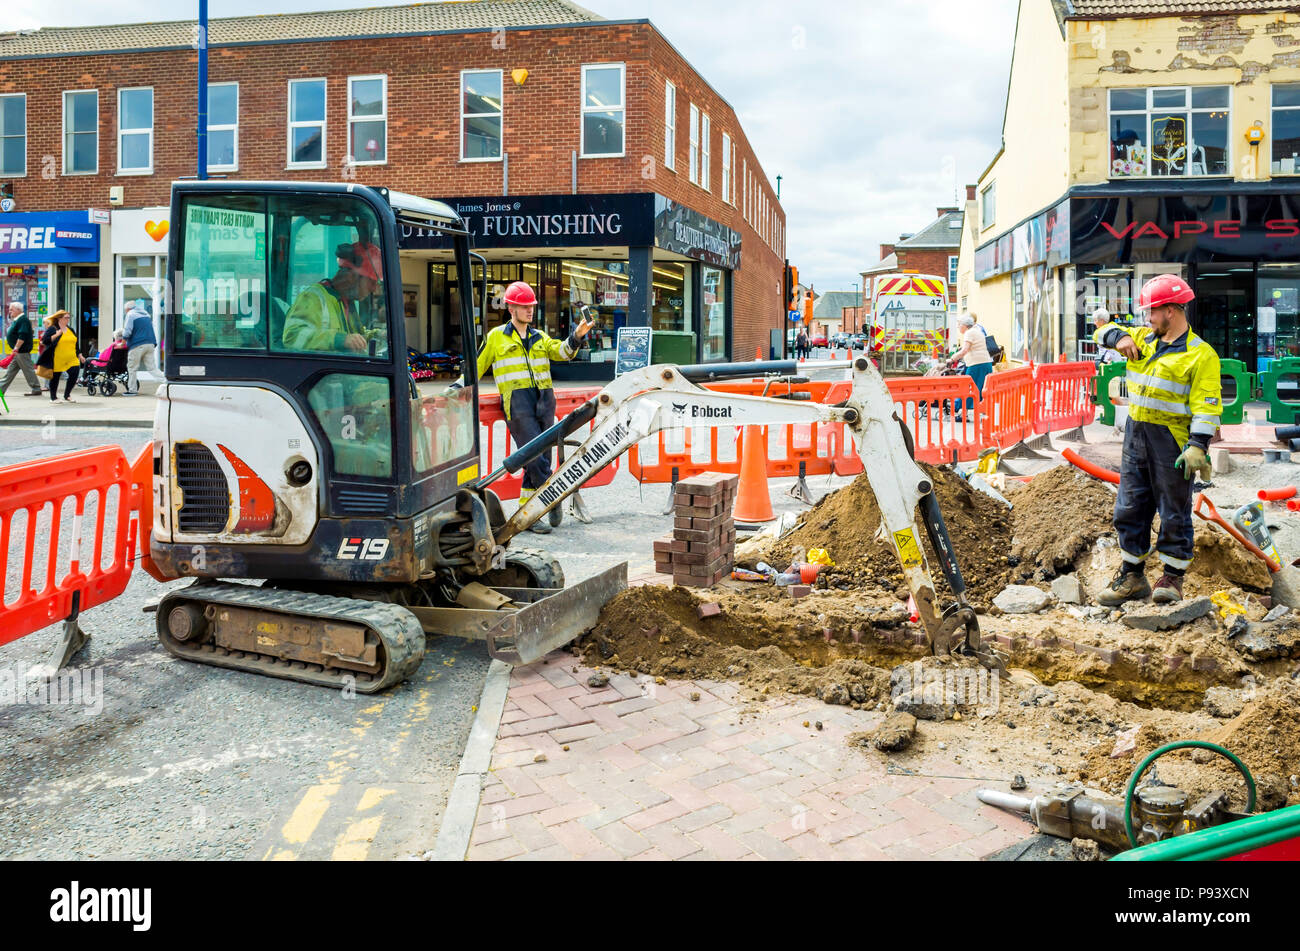 Workmen with a Bobcat excavator digging a trench in the pavement for installation of an electrical power cable Stock Photo